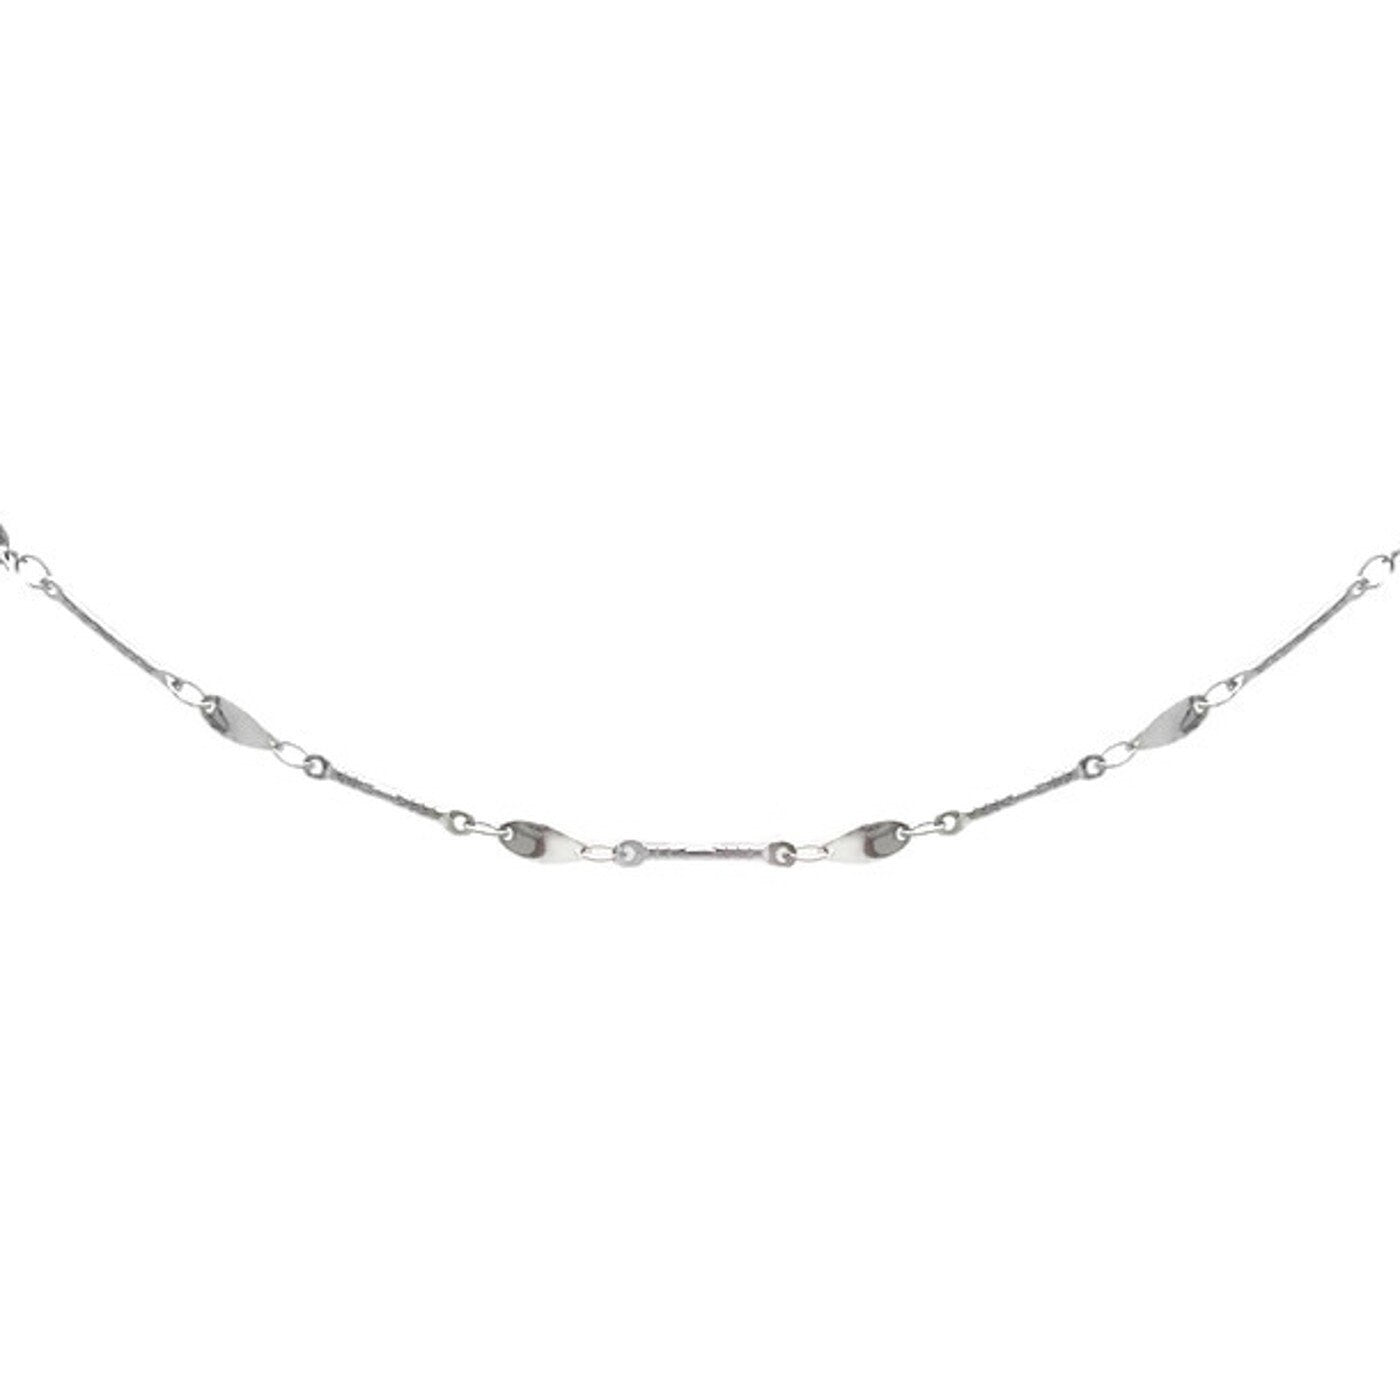 Twisted Silver Chain, Stainless Steel Necklace, Non Tarnish Chain, layering necklace chain, gift for sister, waterproof jewelry